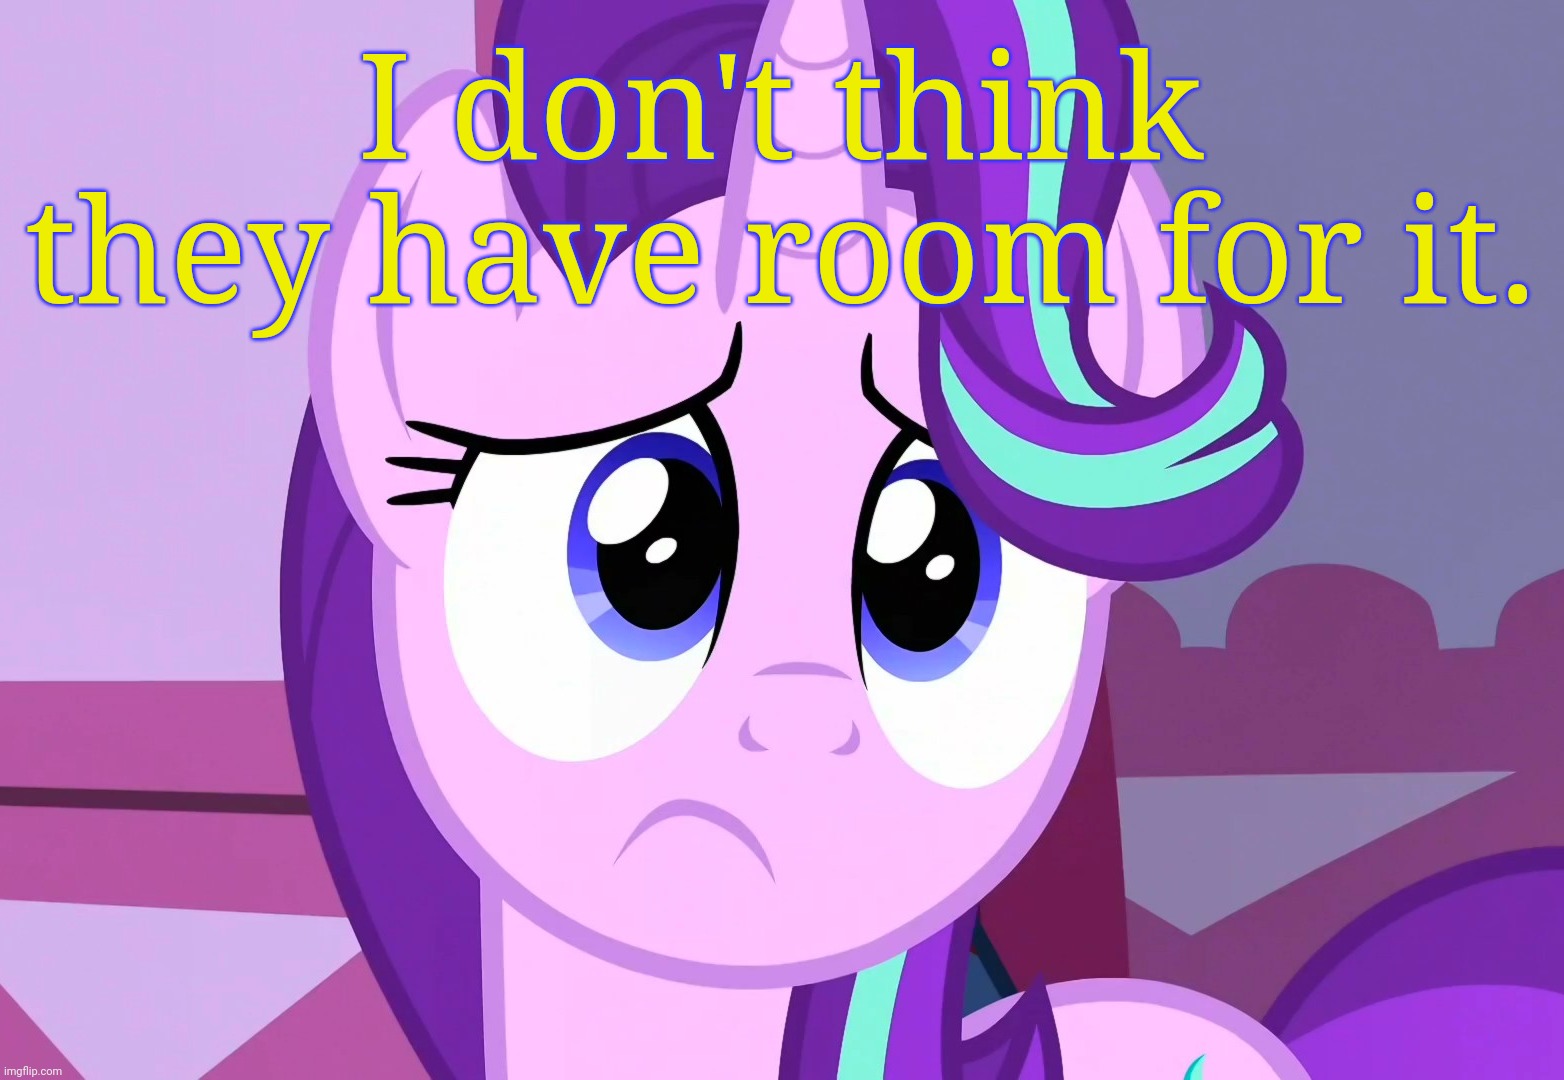 Sadlight Glimmer (MLP) | I don't think they have room for it. | image tagged in sadlight glimmer mlp | made w/ Imgflip meme maker